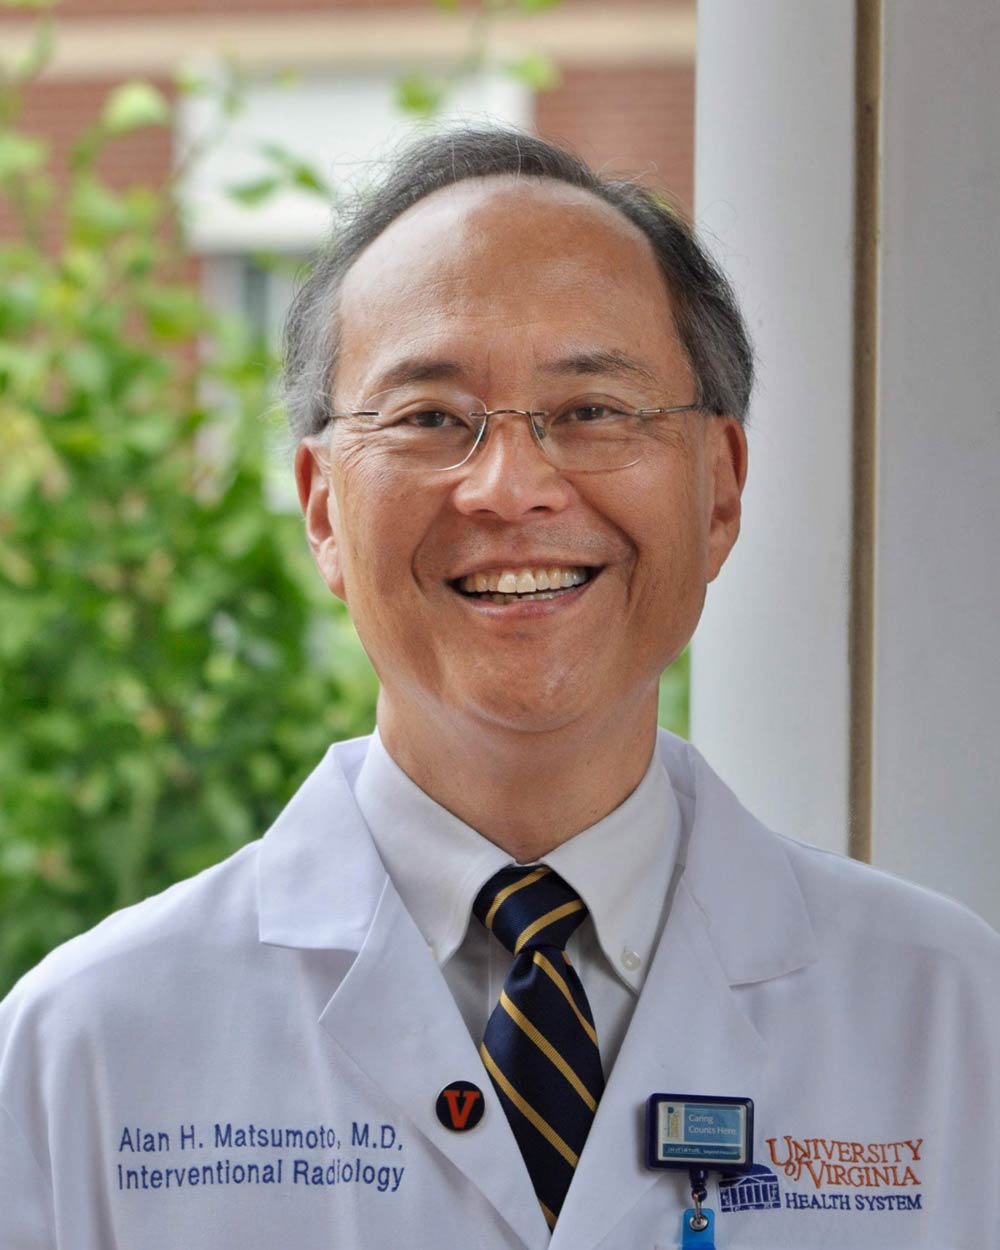 Alan Matsumoto, wearing a white coat, smiles for the camera